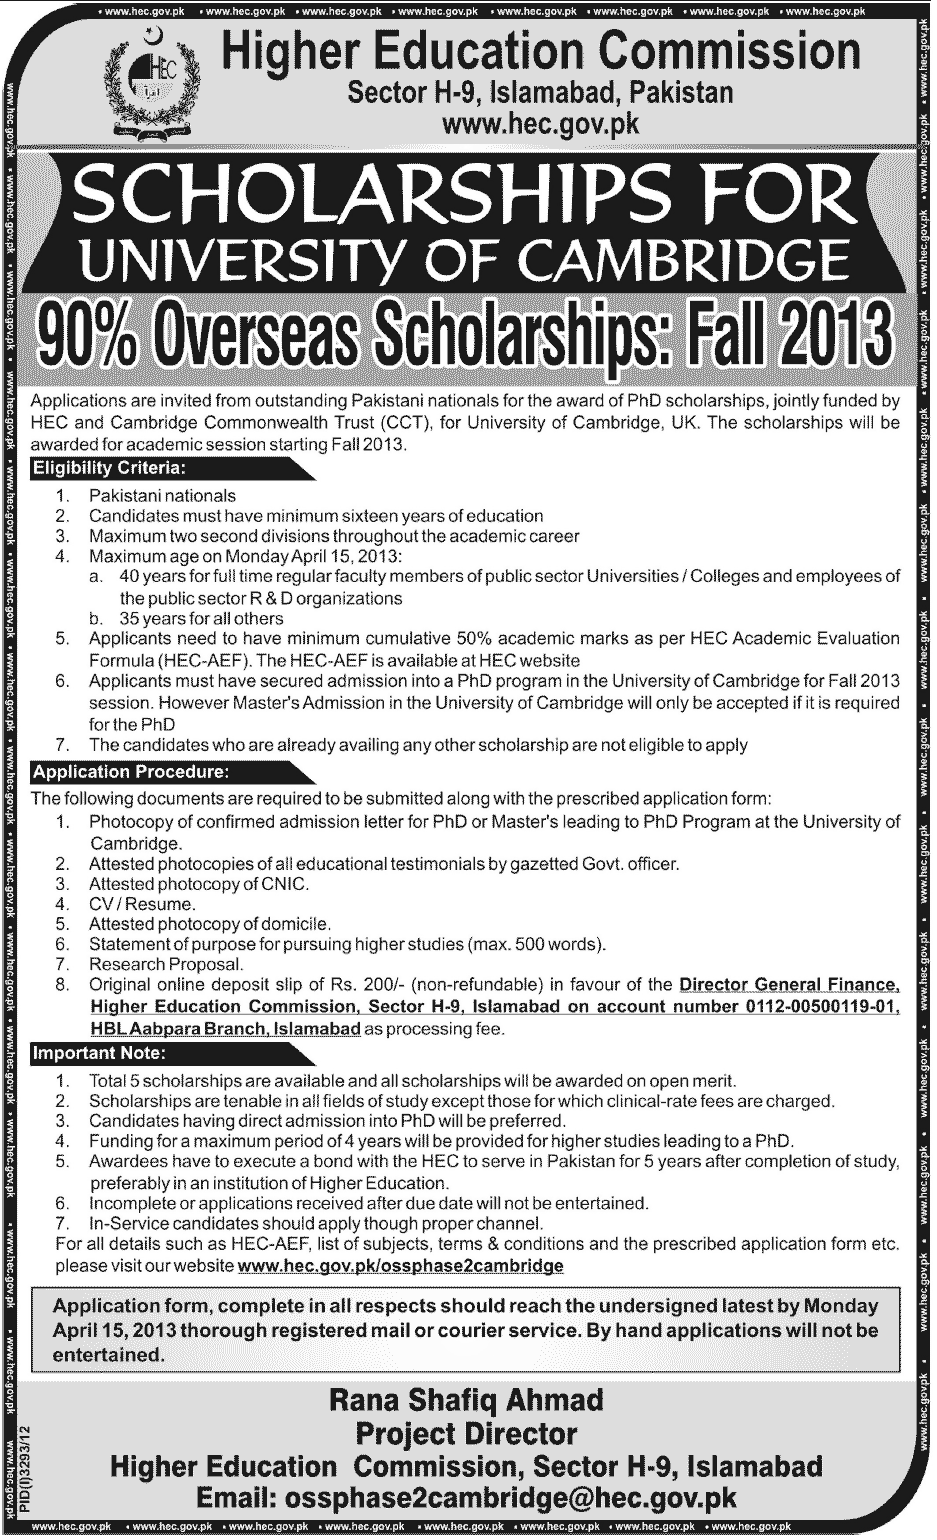 Scholarships for college students 2013 in pakistan